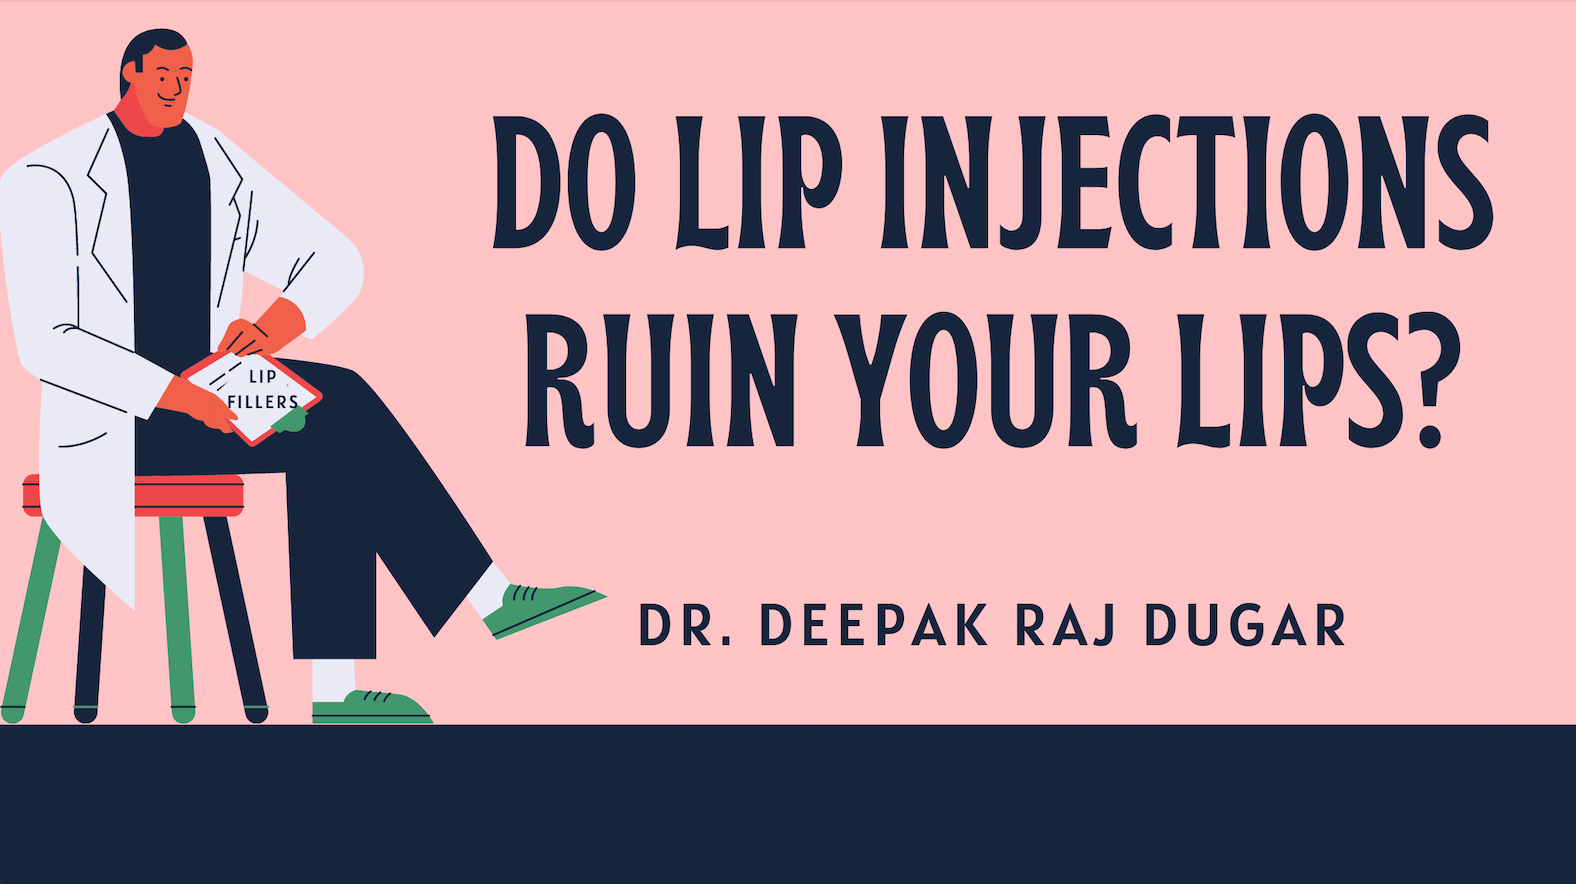 illustration of plastic surgeon reading labs beside the text "Do Lip Injections Ruin Your Lips?"